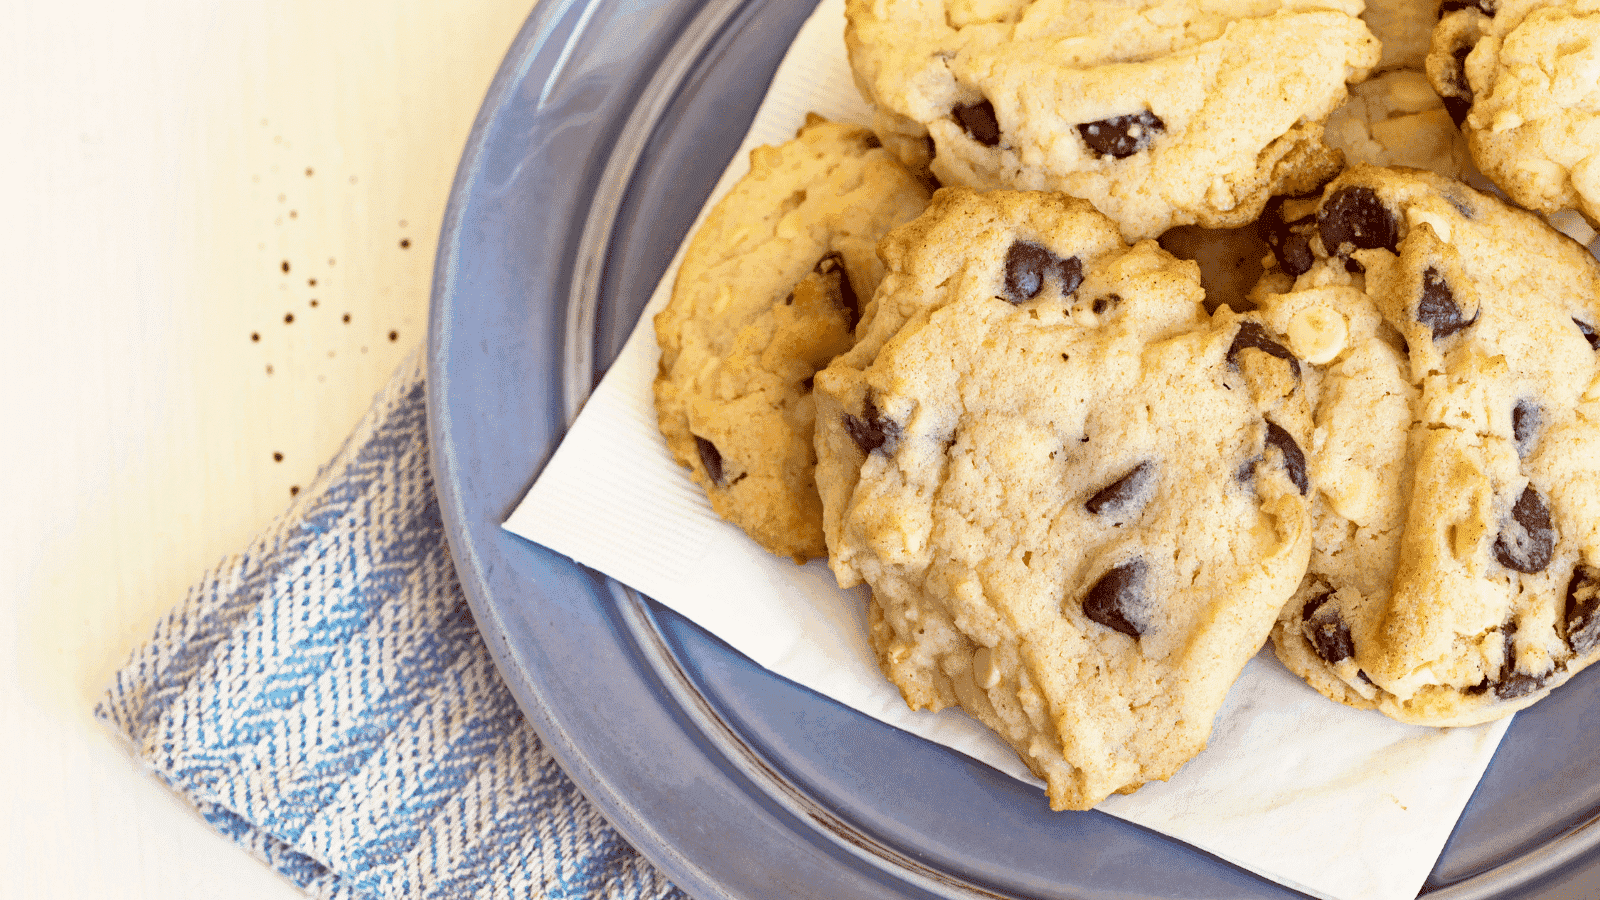 Homemade chocolate chip cookies on a plate